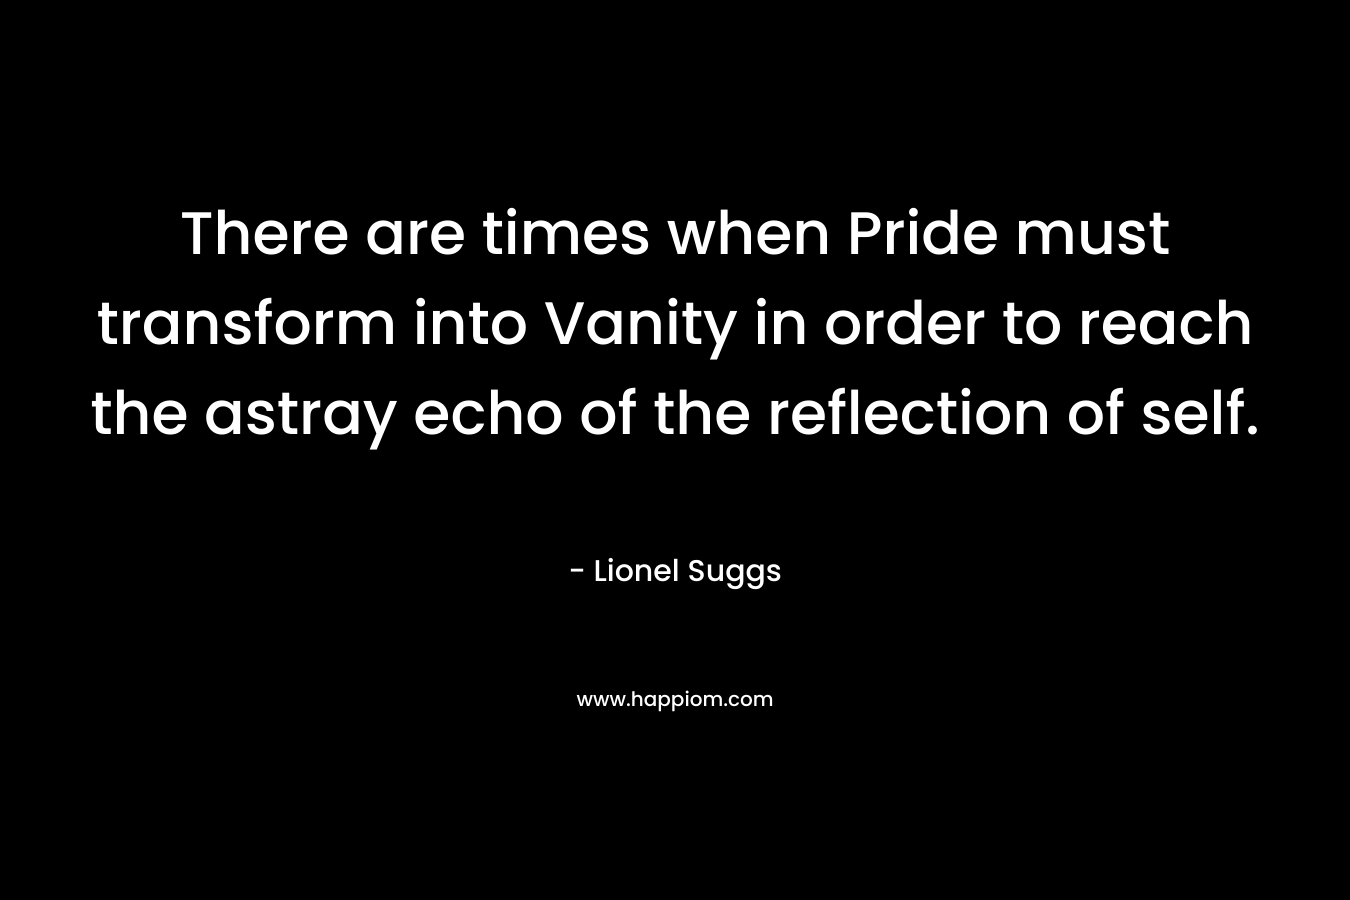 There are times when Pride must transform into Vanity in order to reach the astray echo of the reflection of self.